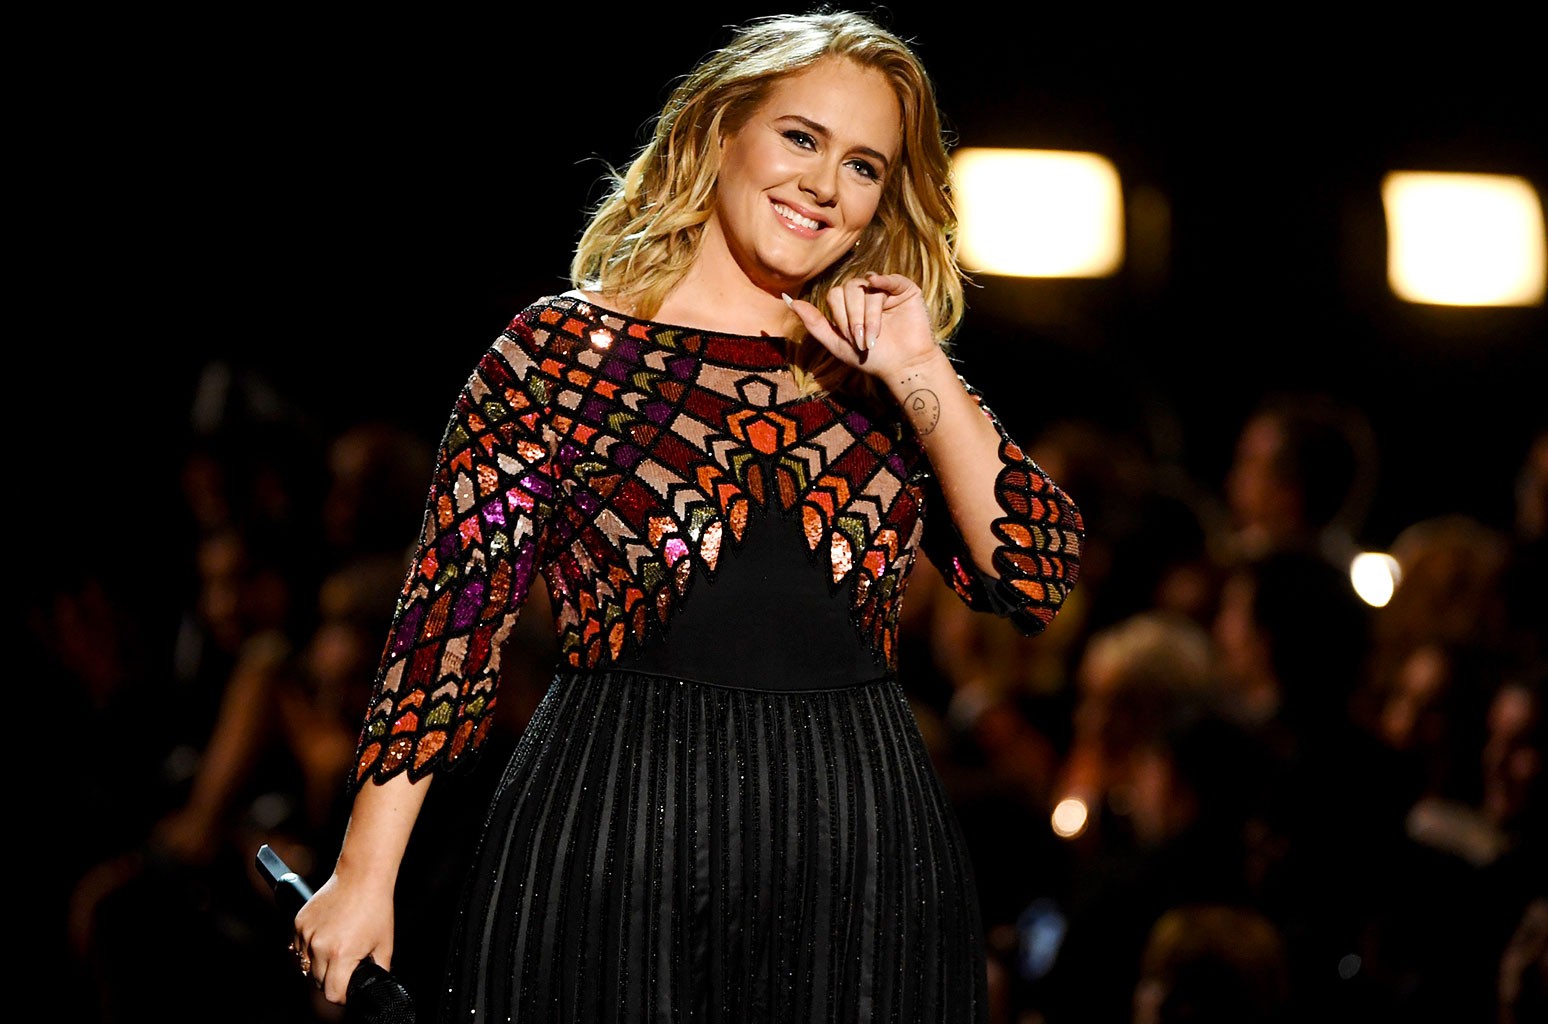 https://www.billboard.com/articles/news/television/9468000/adele-to-host-snl-her-musical-guest